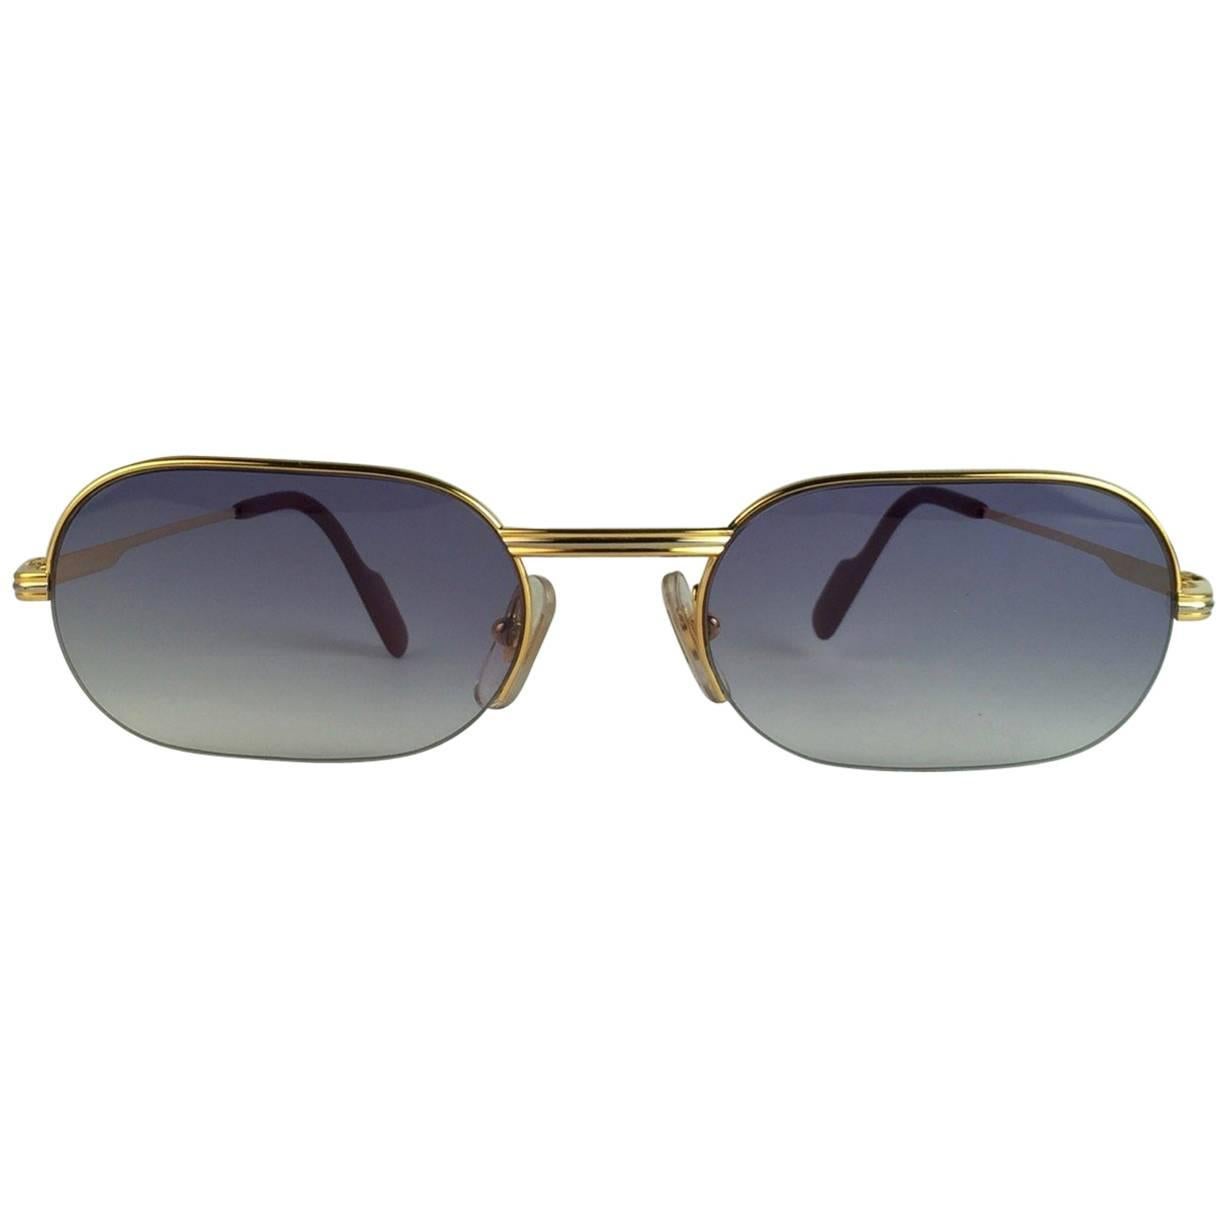 New Cartier Ascot Vendome Gold 55mm Half Frame Sunglasses Elton John France In New Condition For Sale In Baleares, Baleares